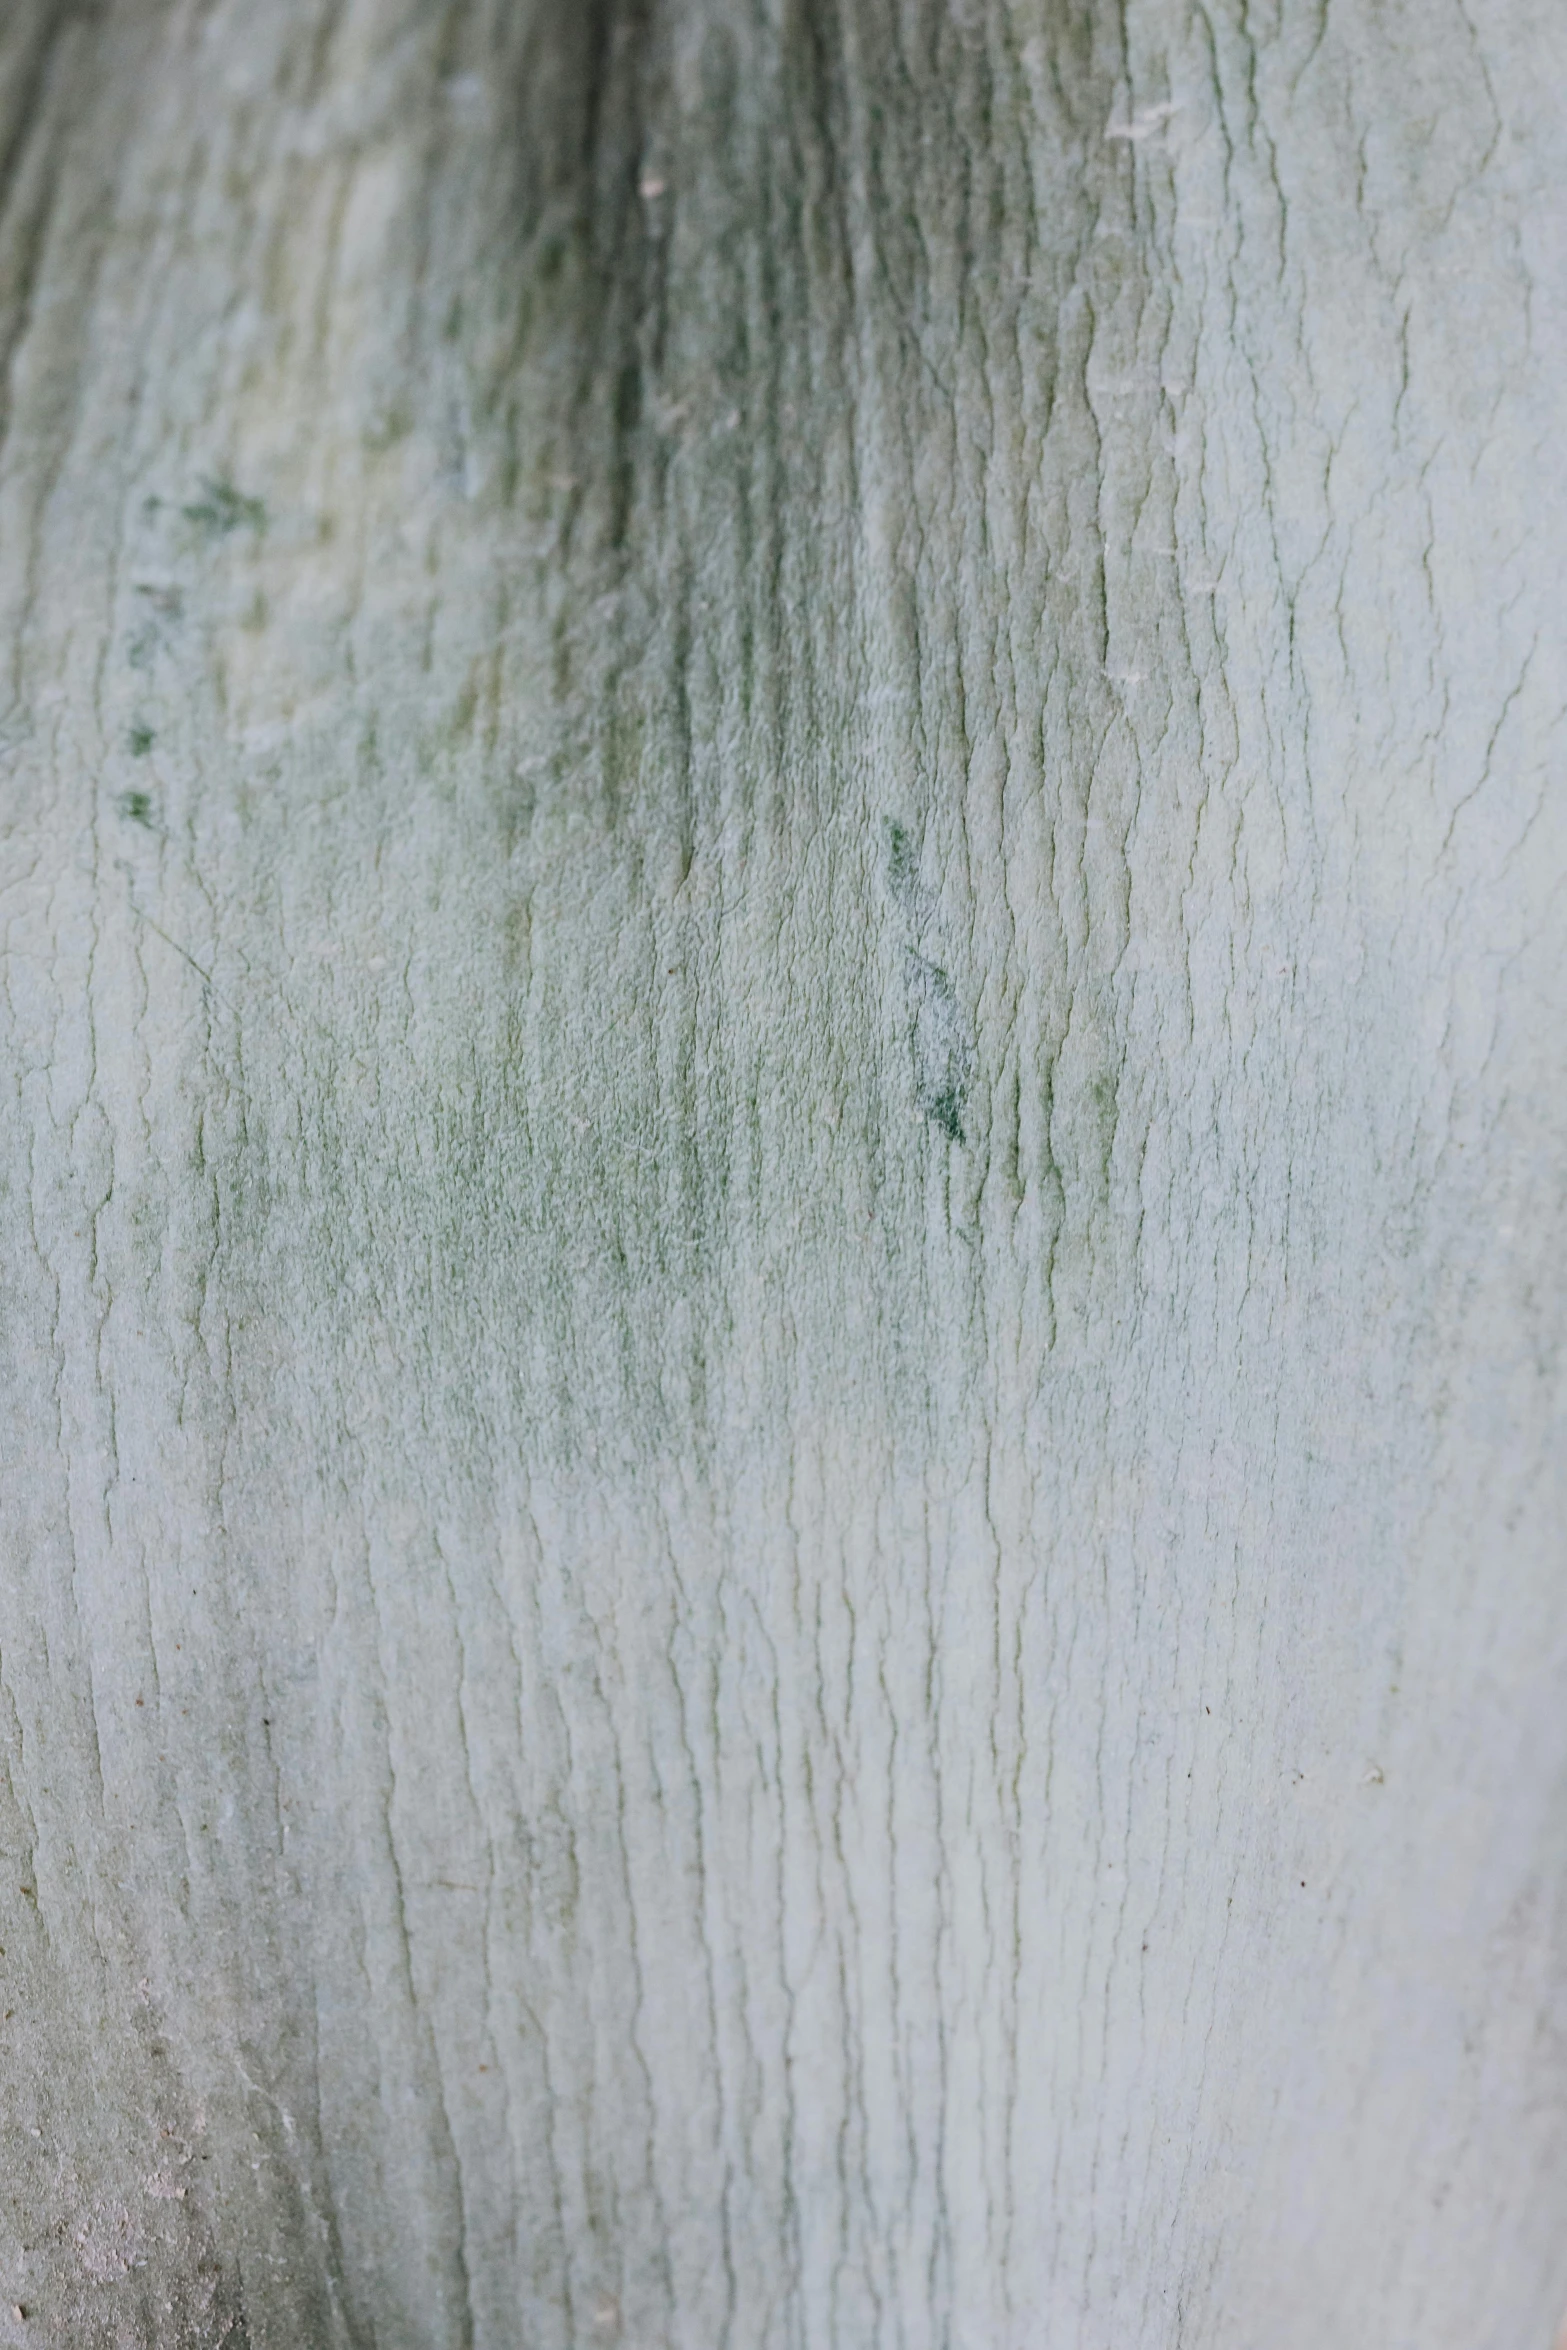 a close up of a white horse's face, by Rudolf Schlichter, unsplash, lyrical abstraction, interior wood, algae, smooth solid concrete, moisture